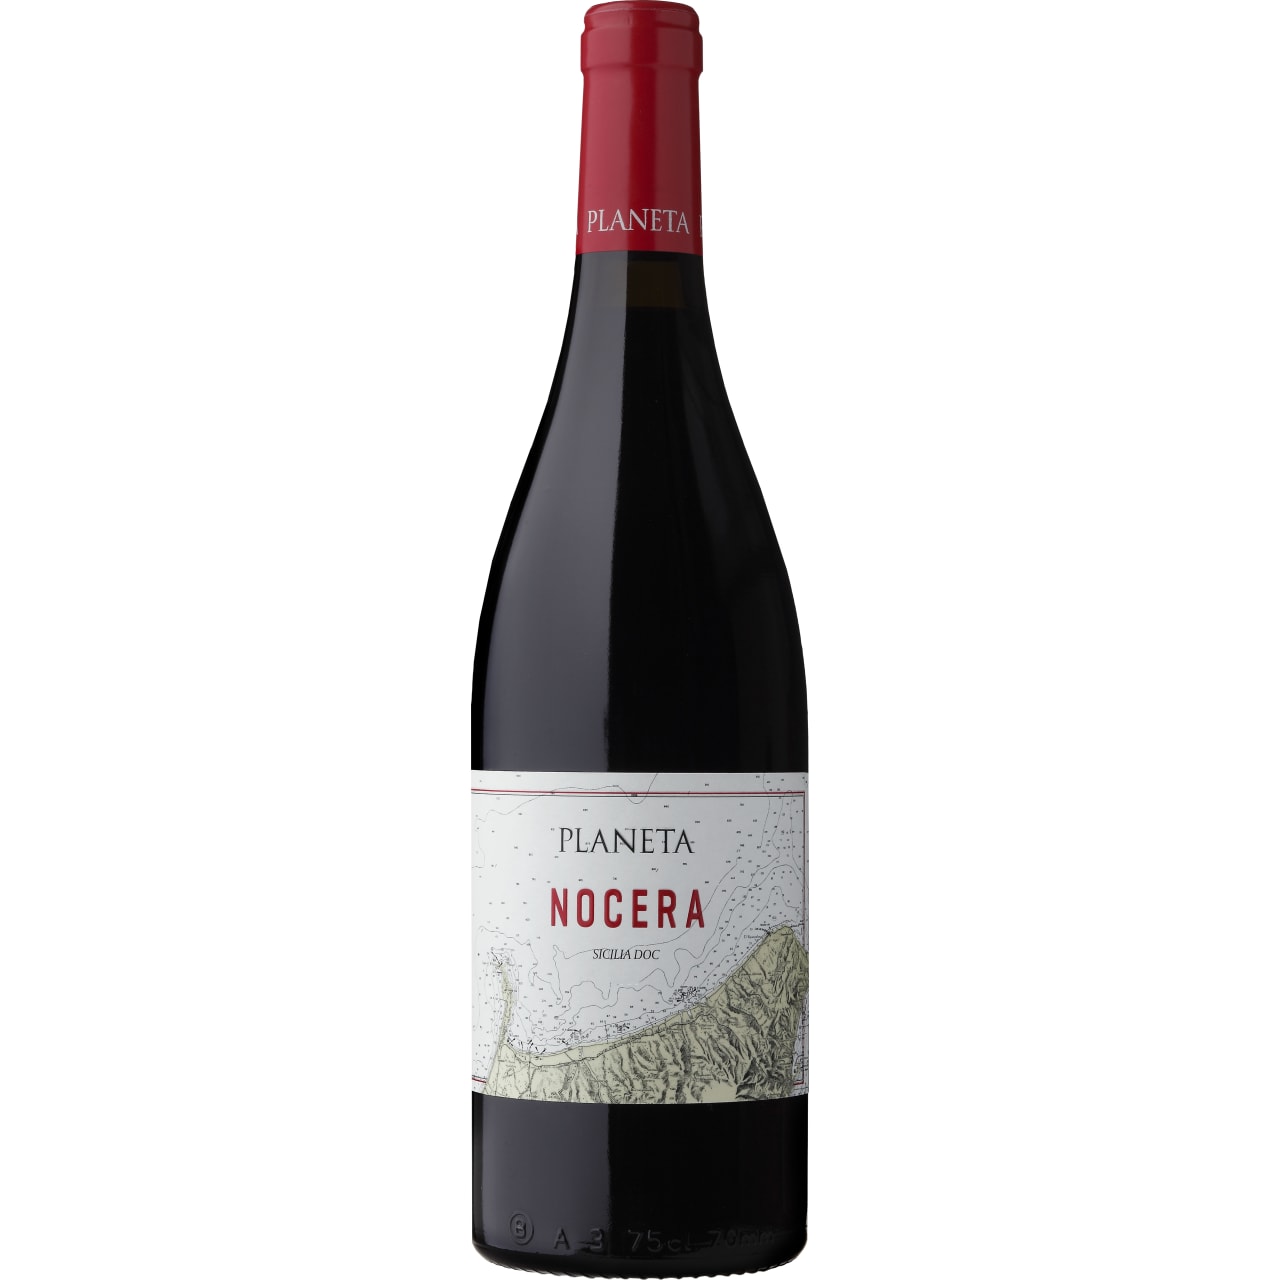 A marine red wine, deep and intense ruby red reflections with aromas of white pepper, geranium, plums and ripe figs.